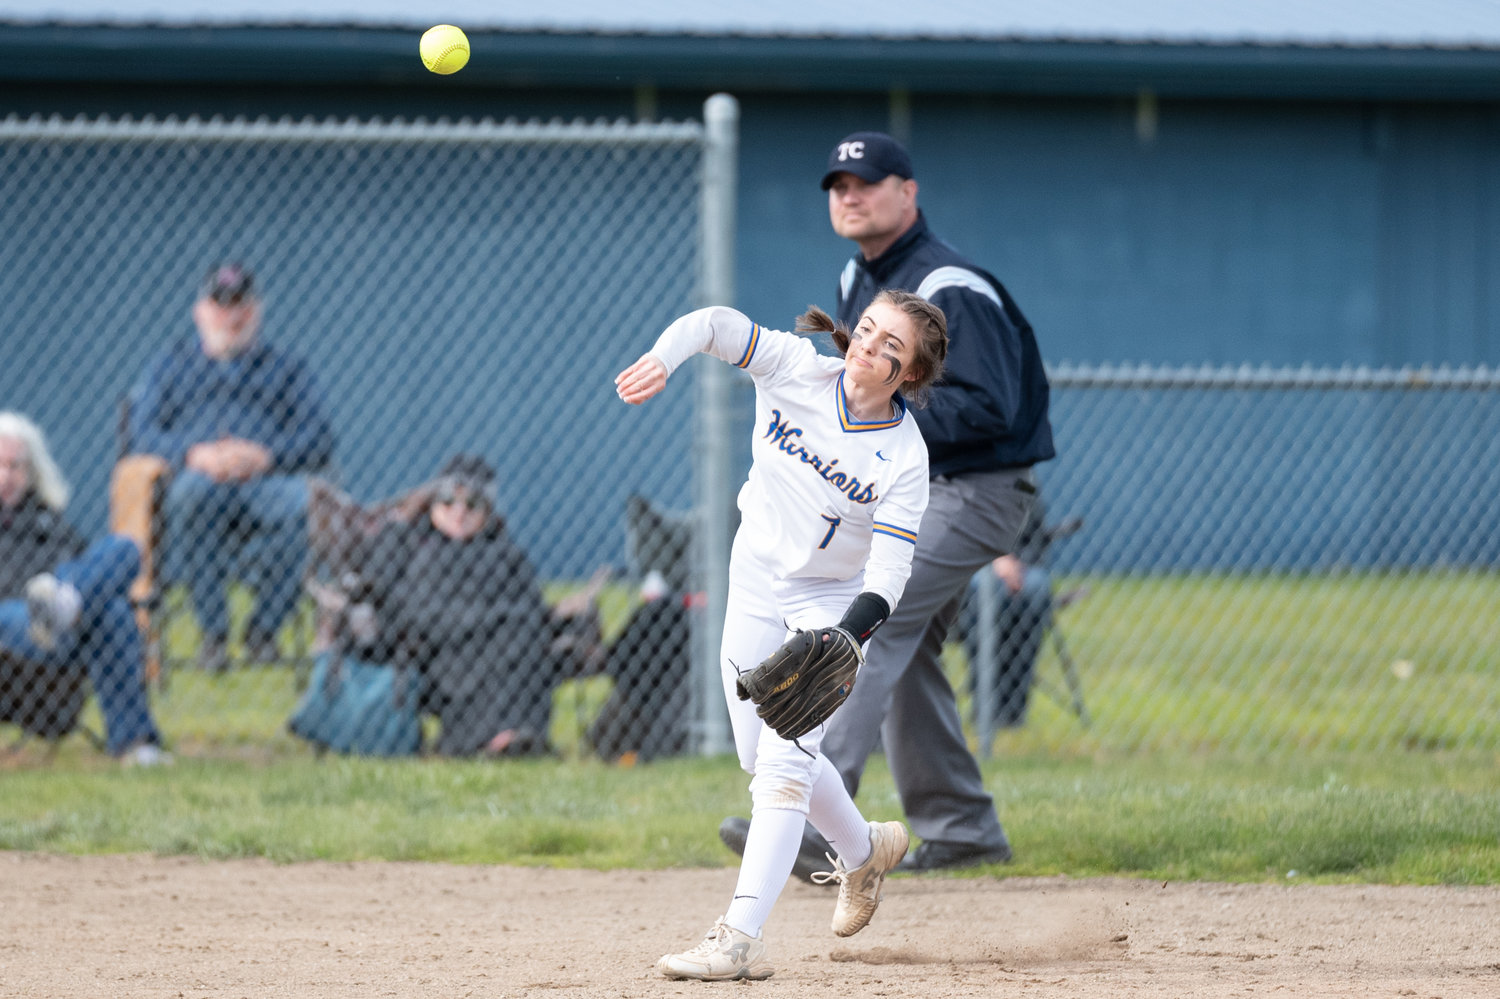 Rochester's Jessa Lenzi looks to throw to first for an out against W.F. West April 29.